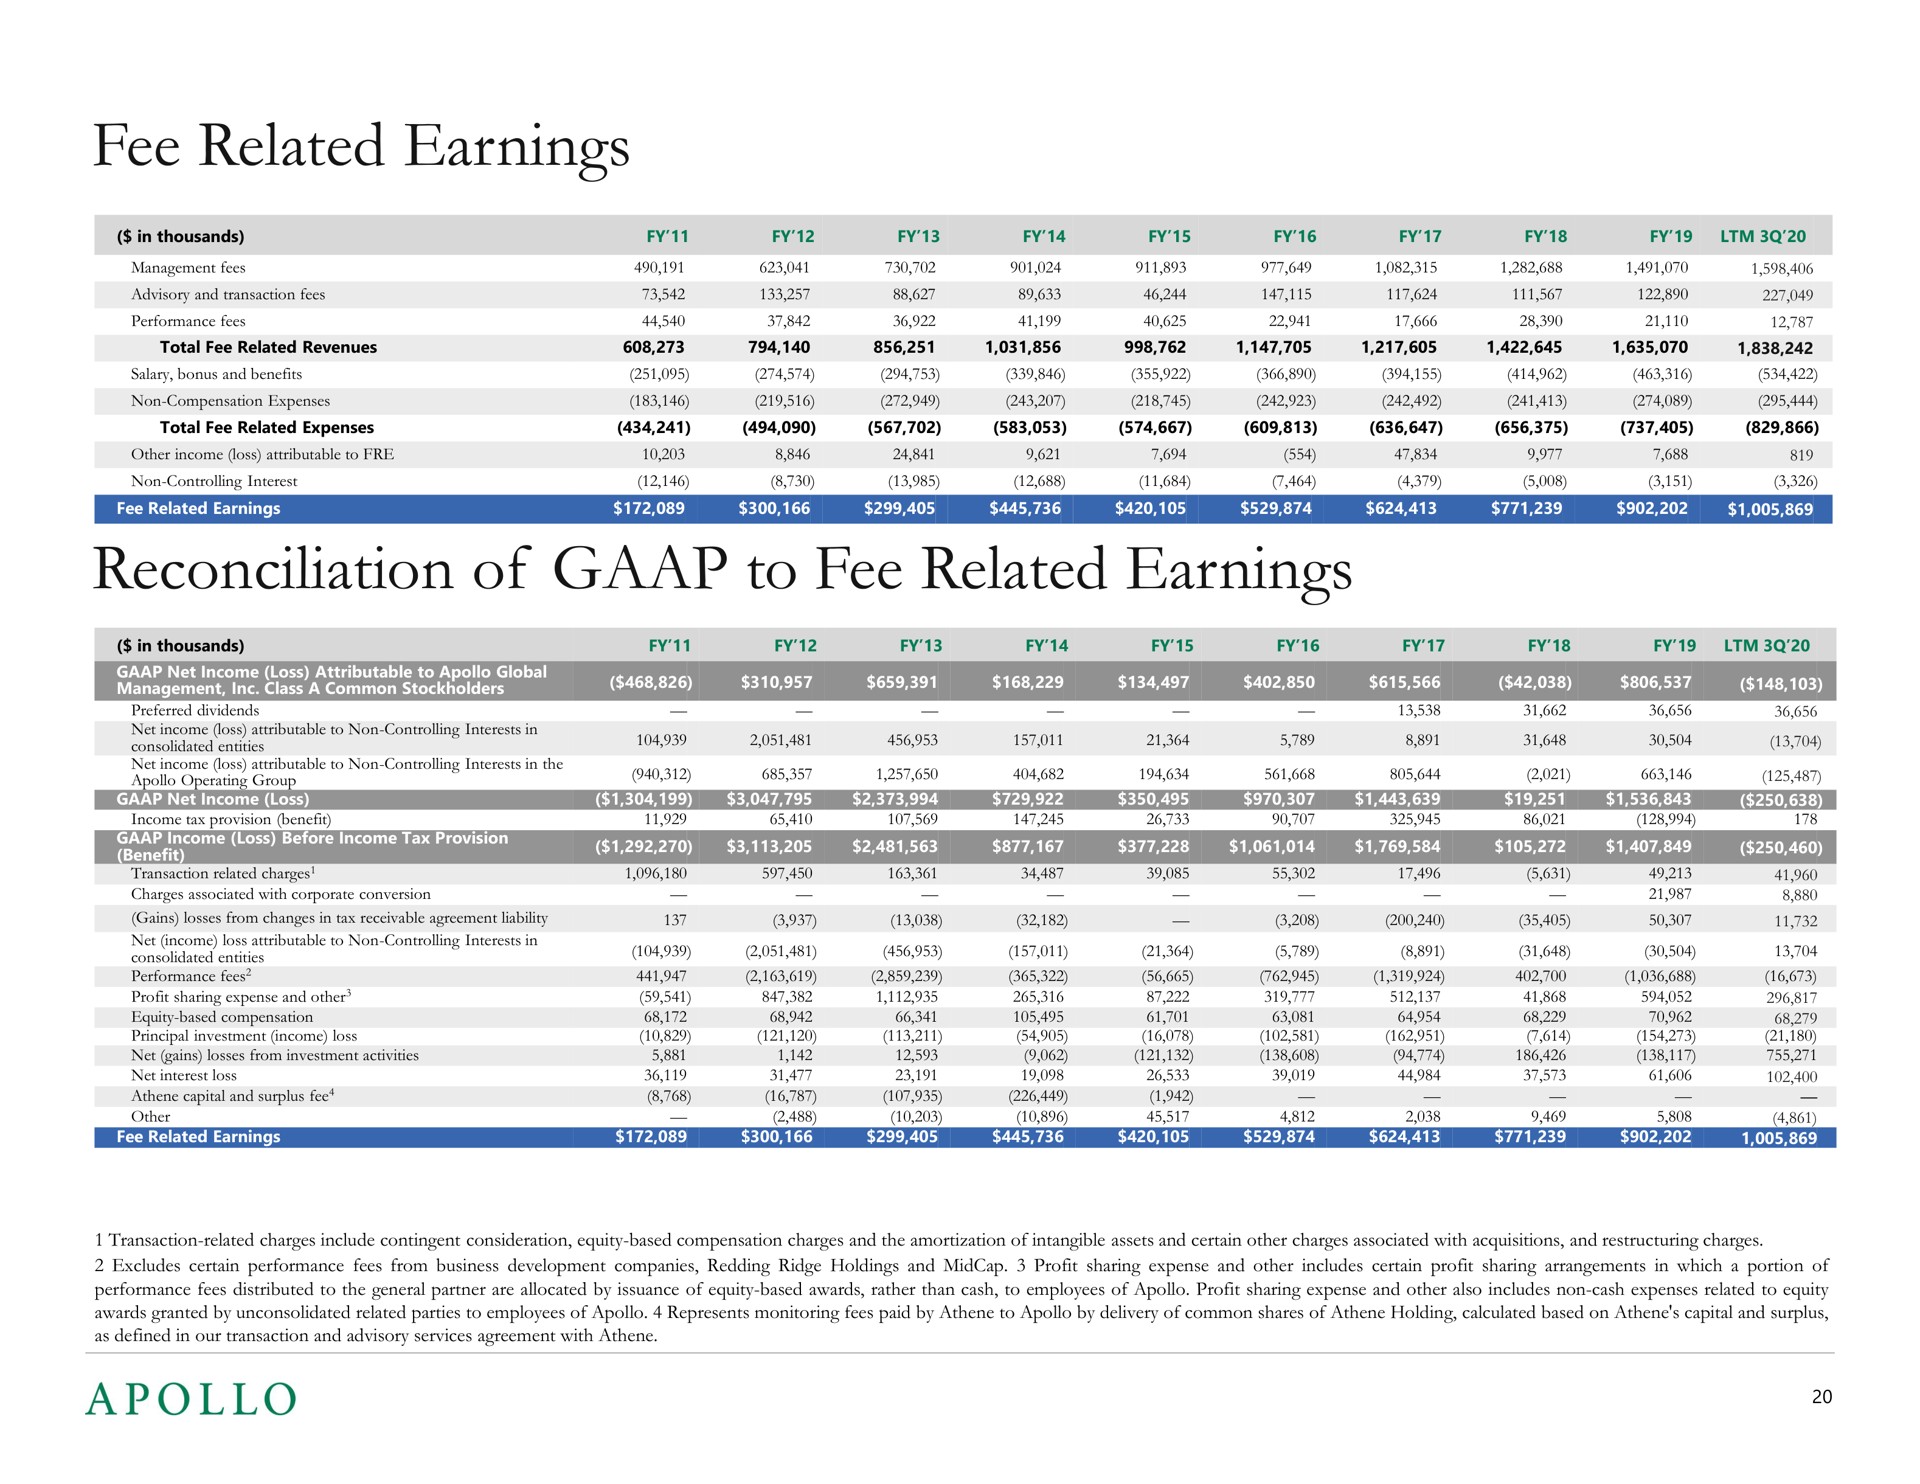 fee related earnings reconciliation of to fee related earnings | Apollo Global Management